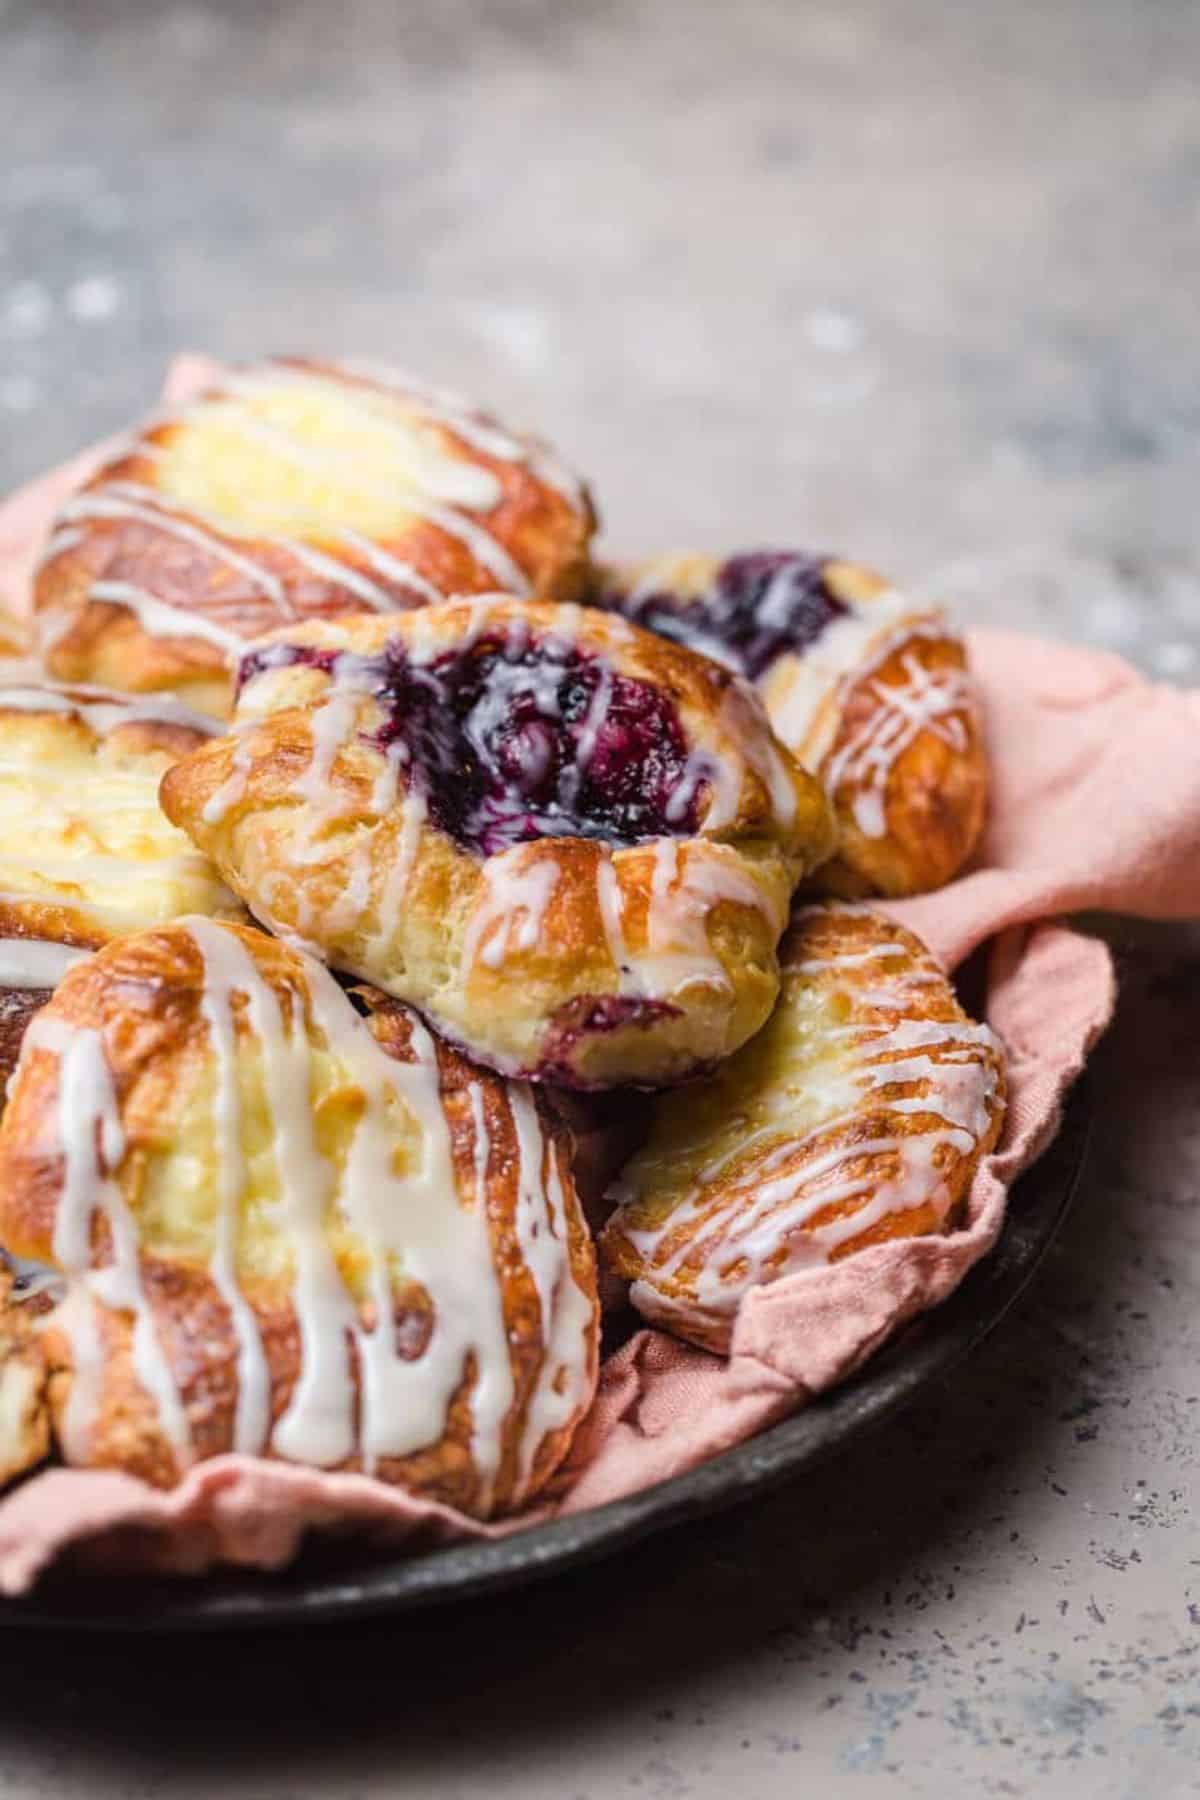 Scrumptious danish pastry in a bowl.